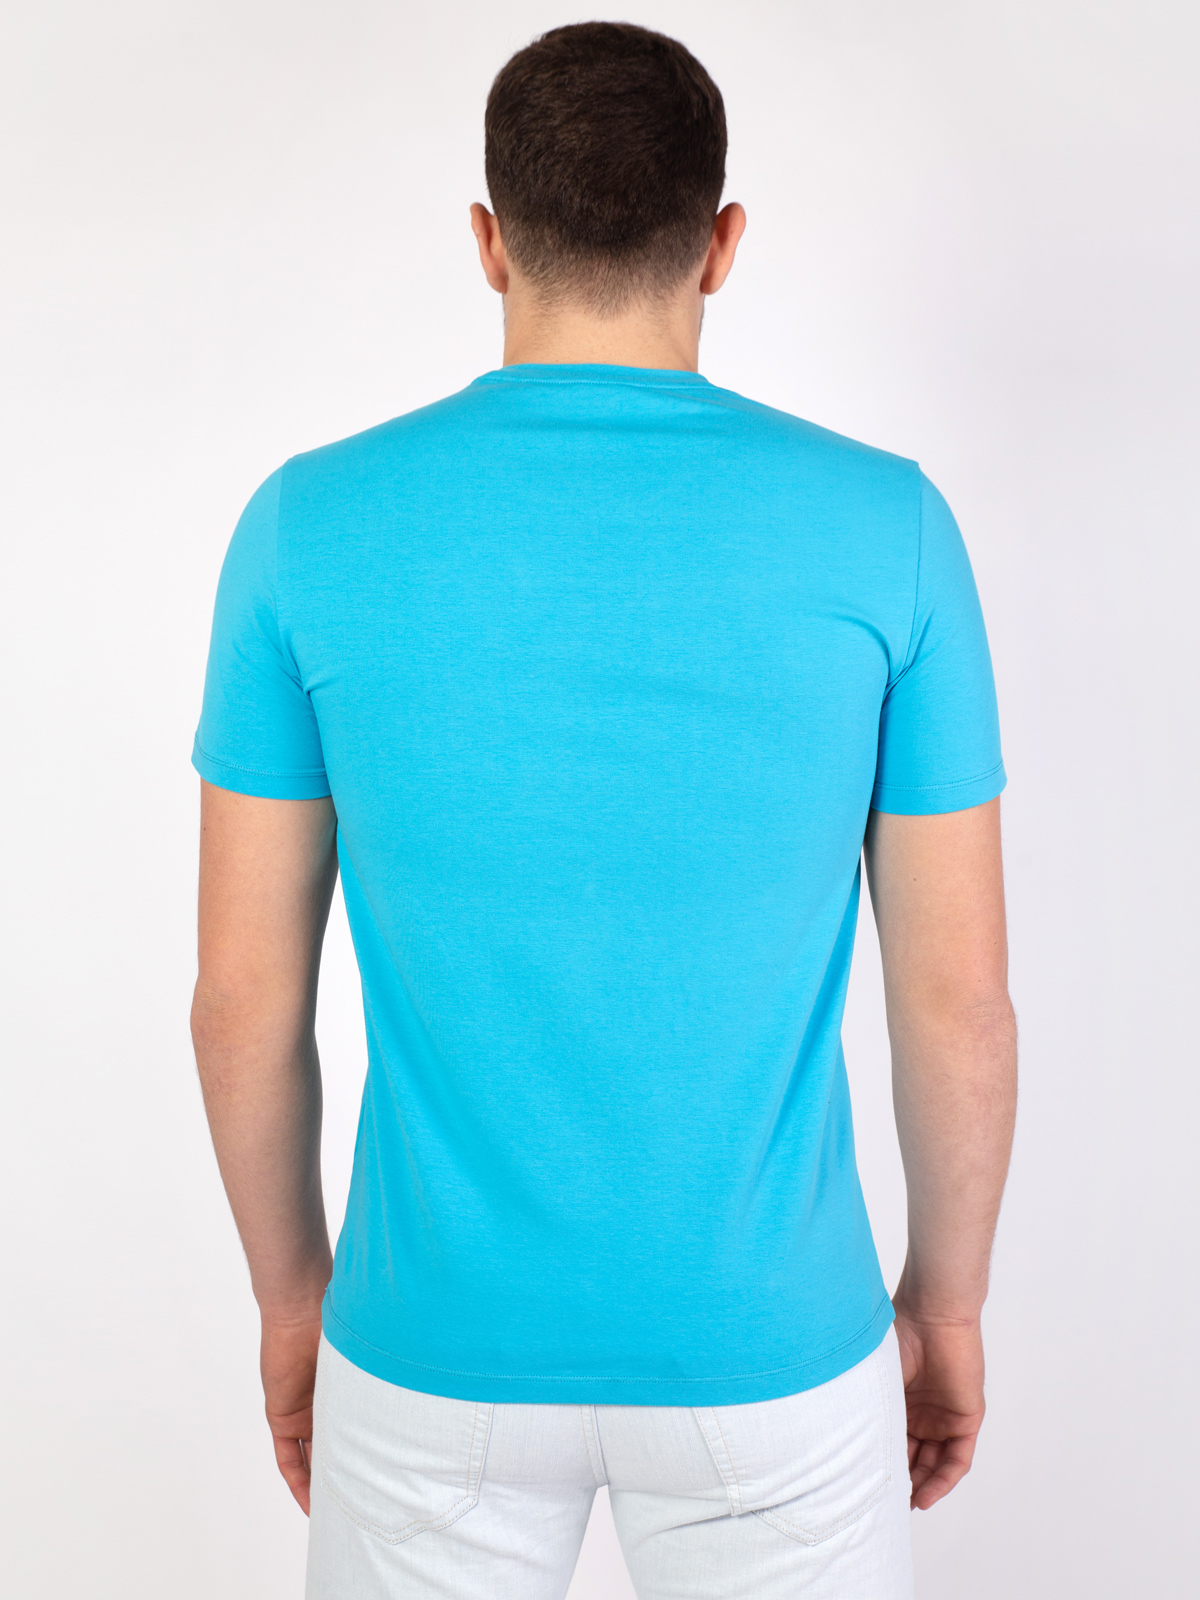 Blue tshirt with print in white and bl - 96400 € 16.31 img4